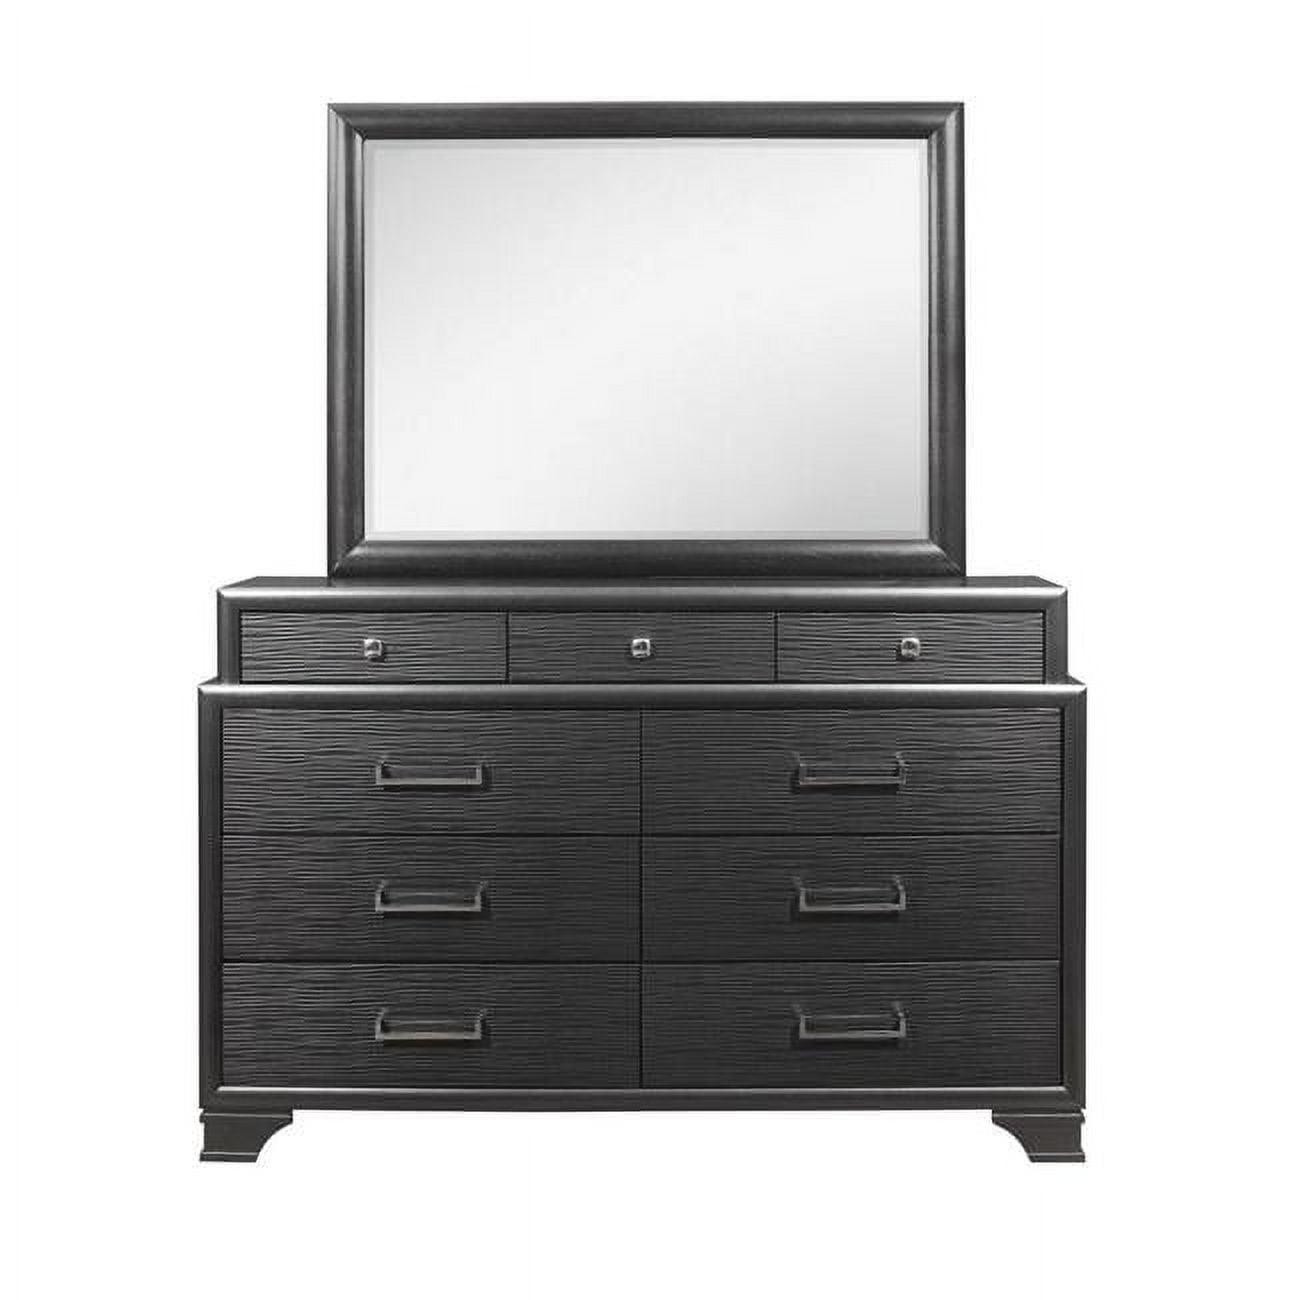 Mirrored Dark Gray Solid Wood Dresser with Soft Close Drawers